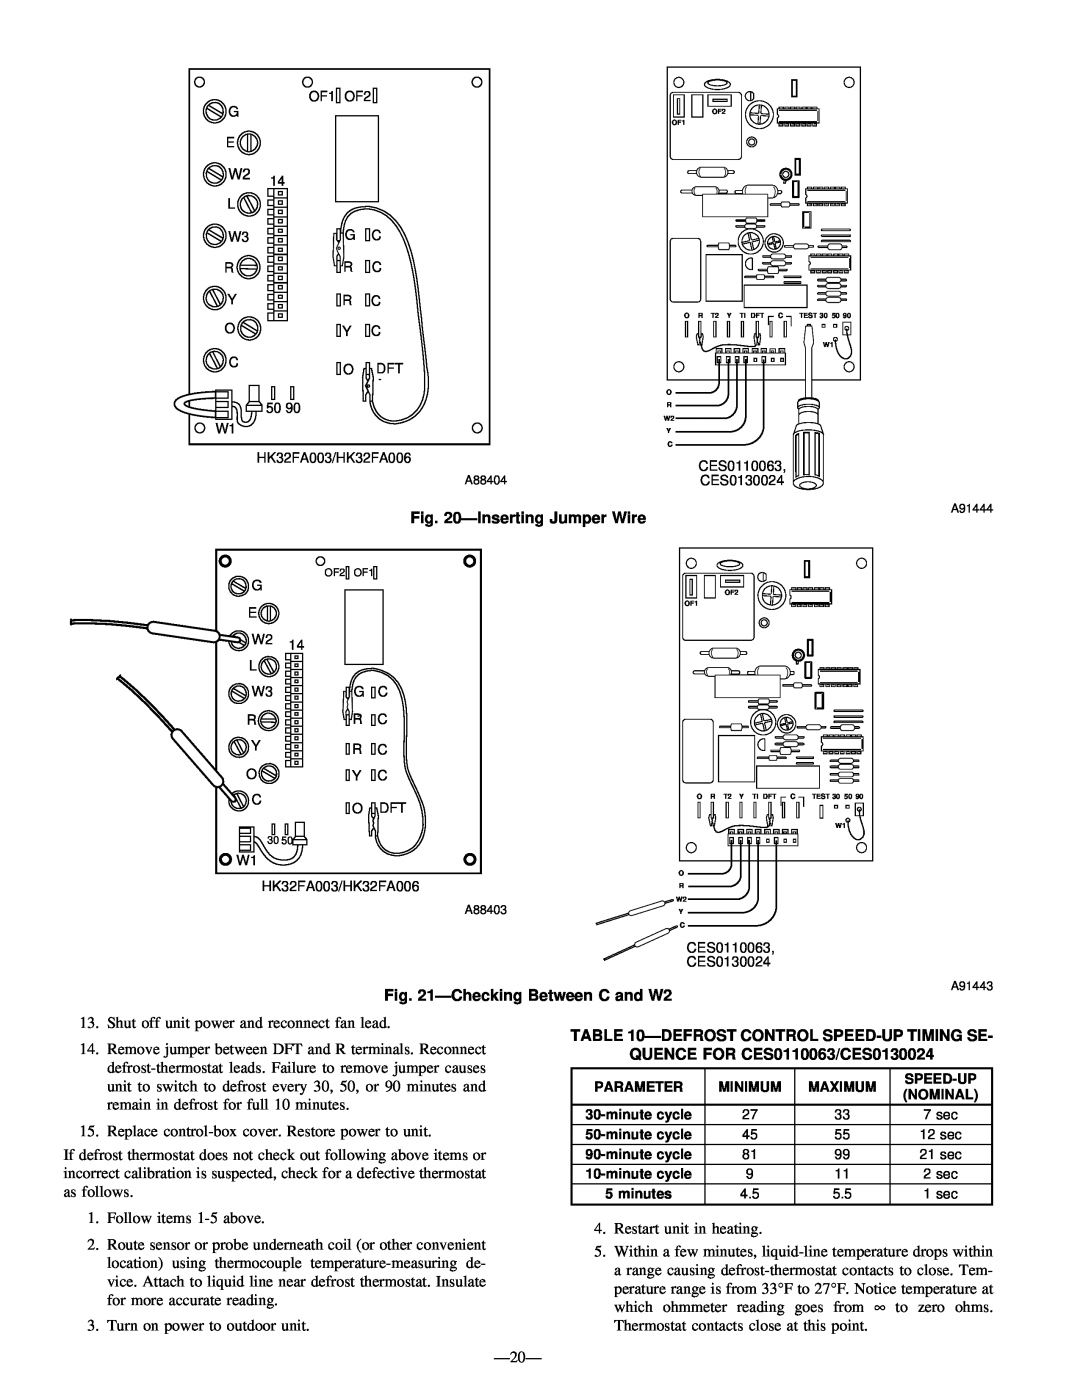 Bryant R-22 service manual InsertingJumper Wire, CheckingBetween C and W2, Defrostcontrol Speed-Uptiming Se 